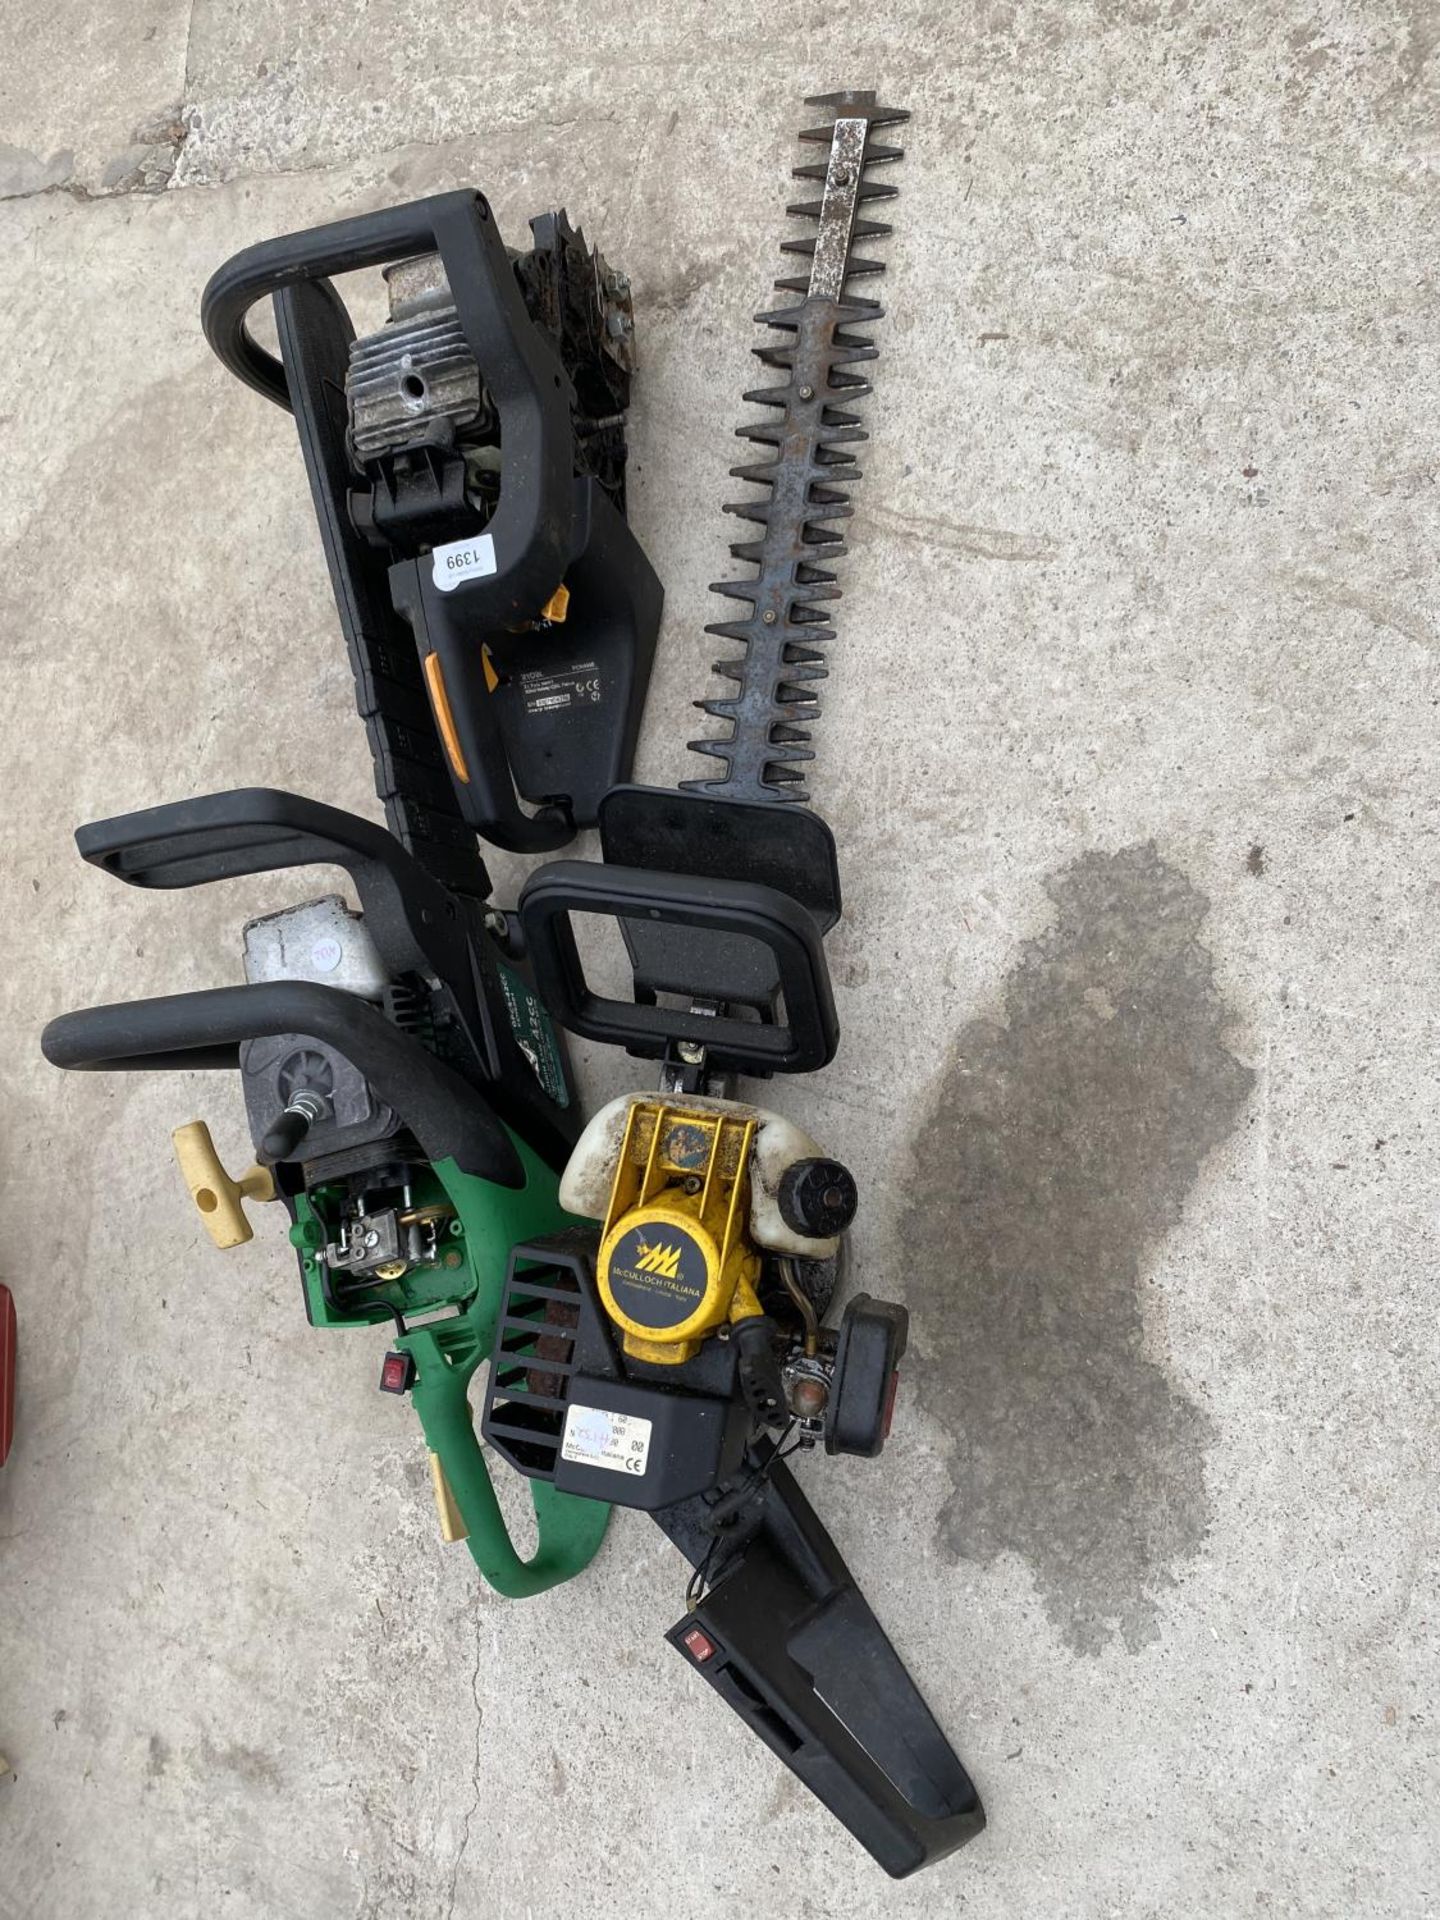 TWO PETROL CHAINSAWS FOR RESTORING AND A PETROL HEDGE TRIMMER - Image 5 of 5